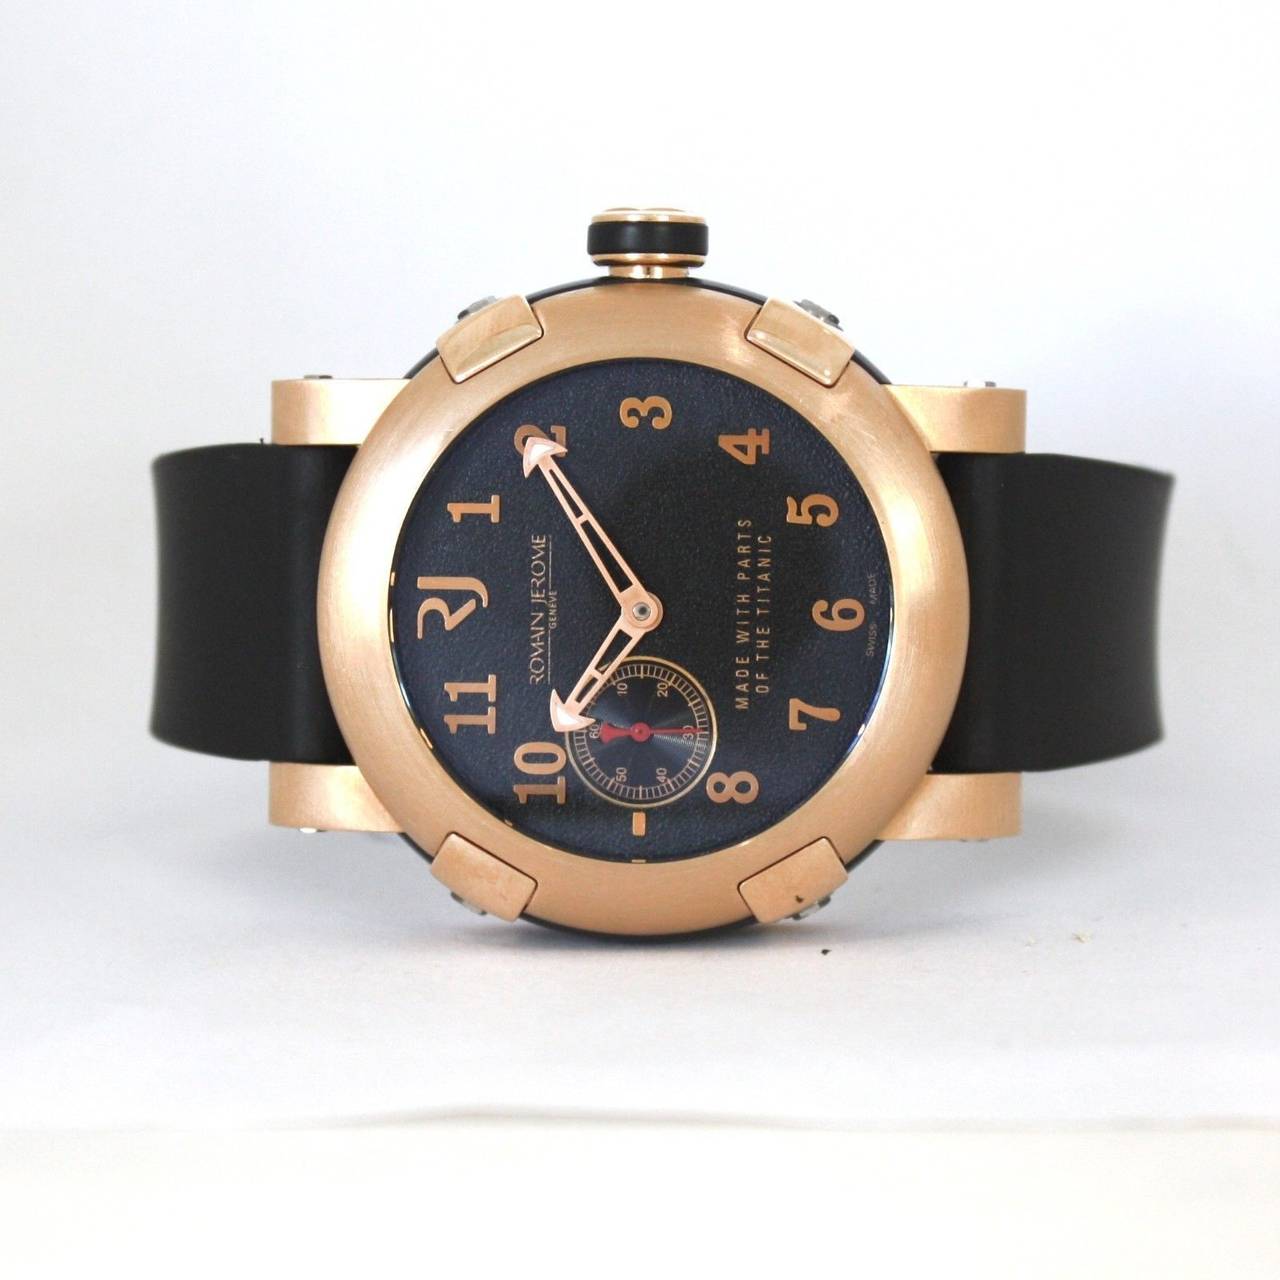 Brand Name  Romain Jerome  
Style Number  T.222BB.00.BB  
Also Called  T222BB00BB  
Series  Titanic DNA  
Gender  Men's  
Case Material  18k Rose Gold  
Dial Color  Deep black color obtained with coal recovered from the Titanic with hour and